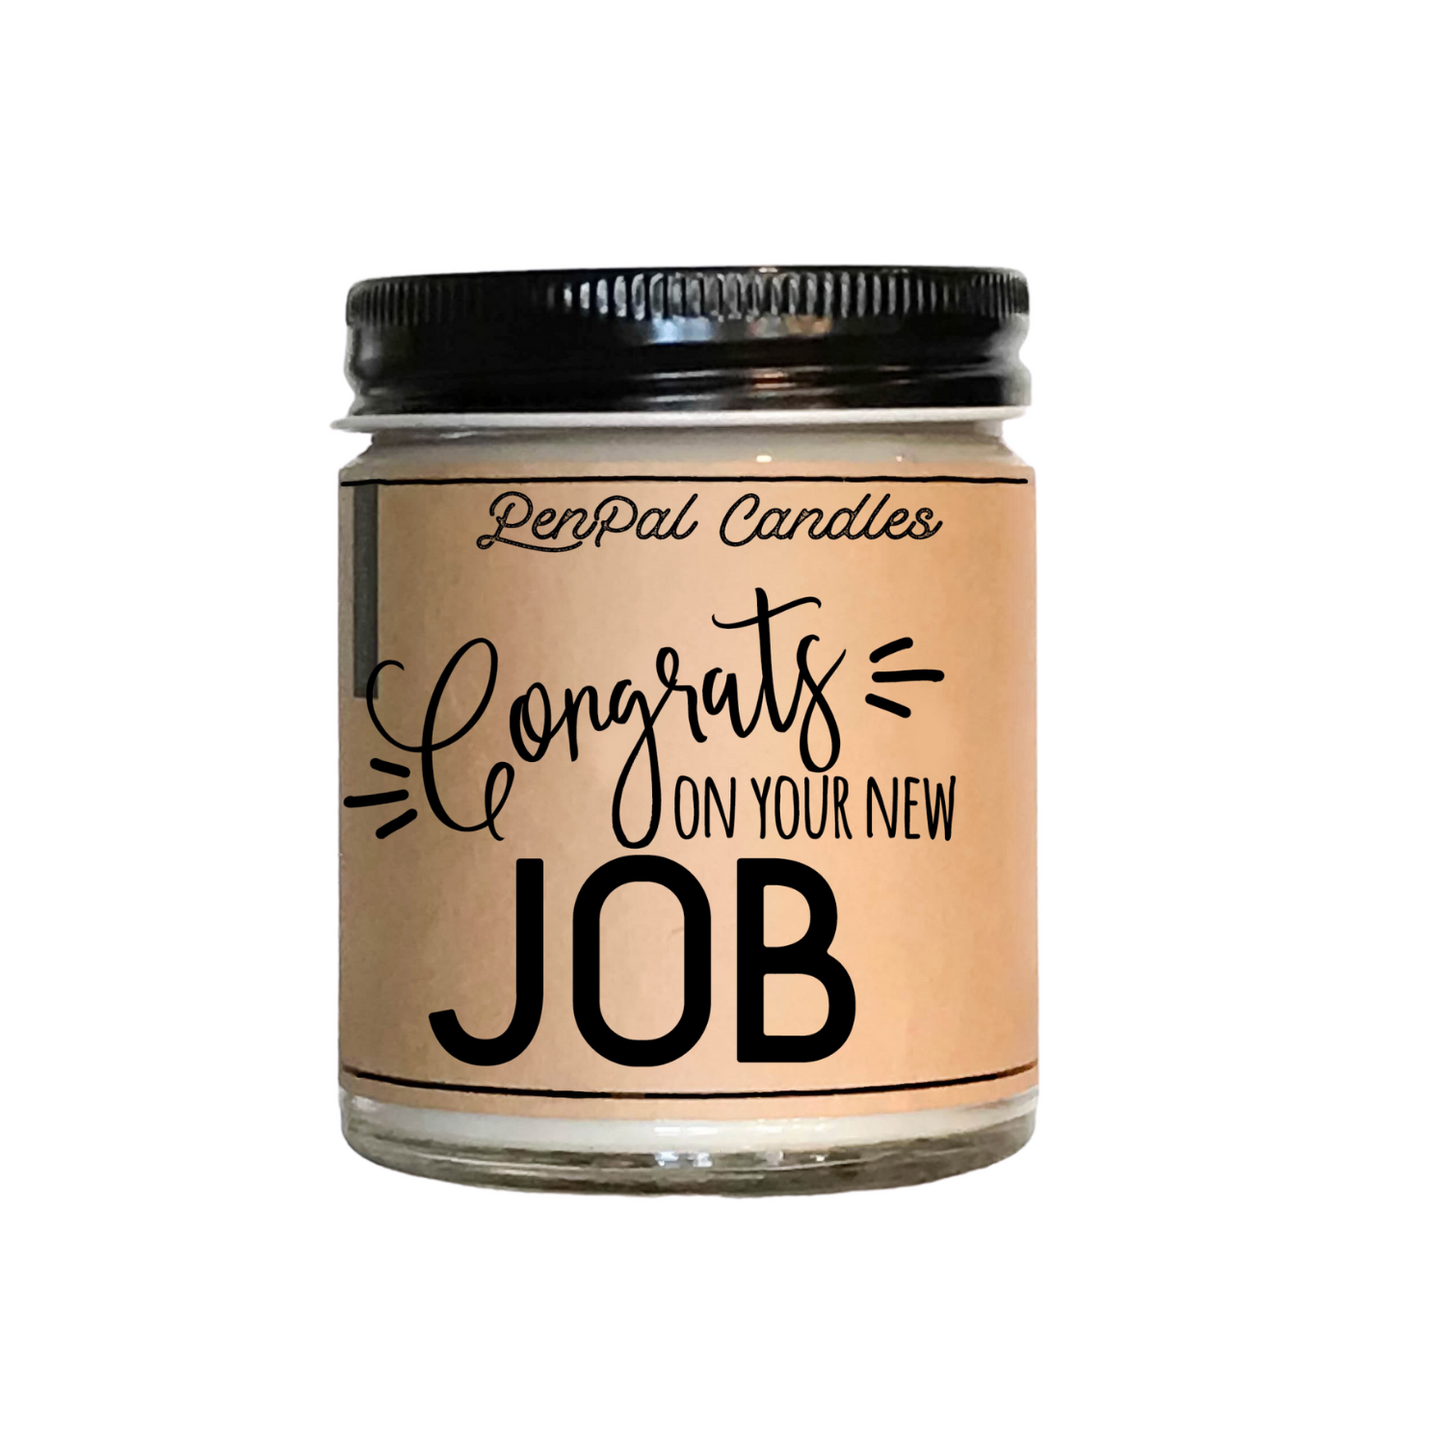 Congrats on your New Job - Scented Candle